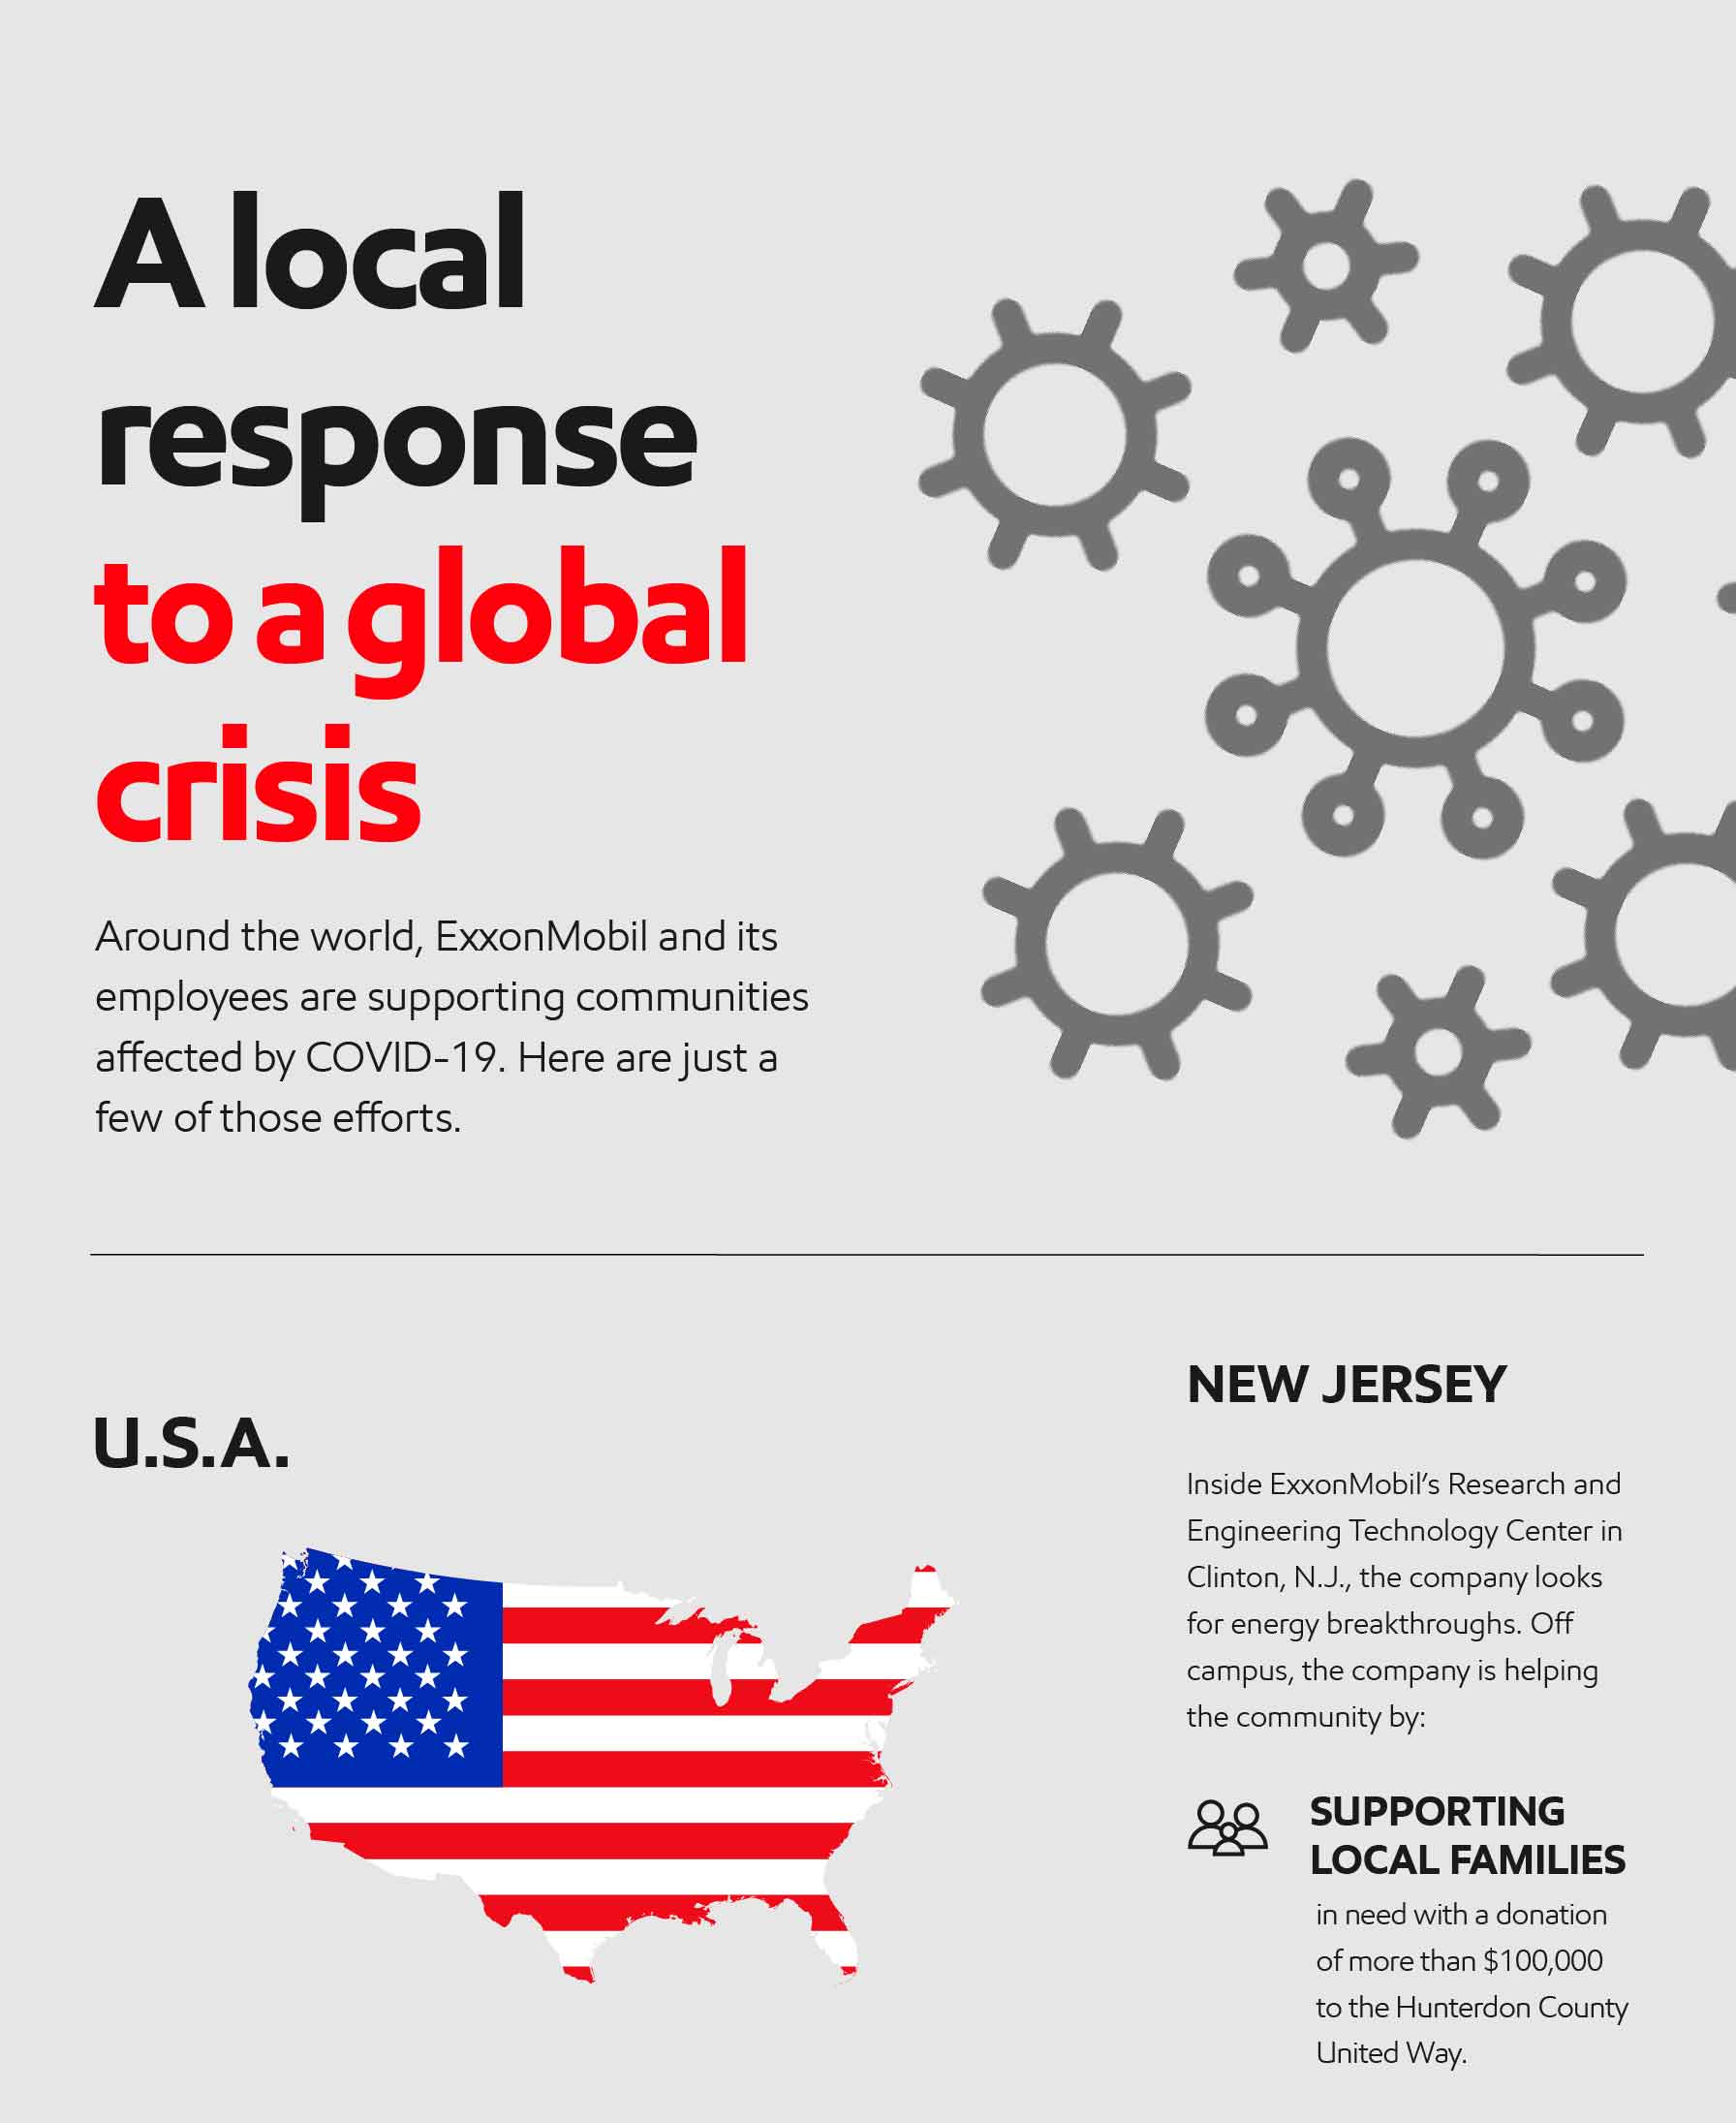 Our Global Response Infographic